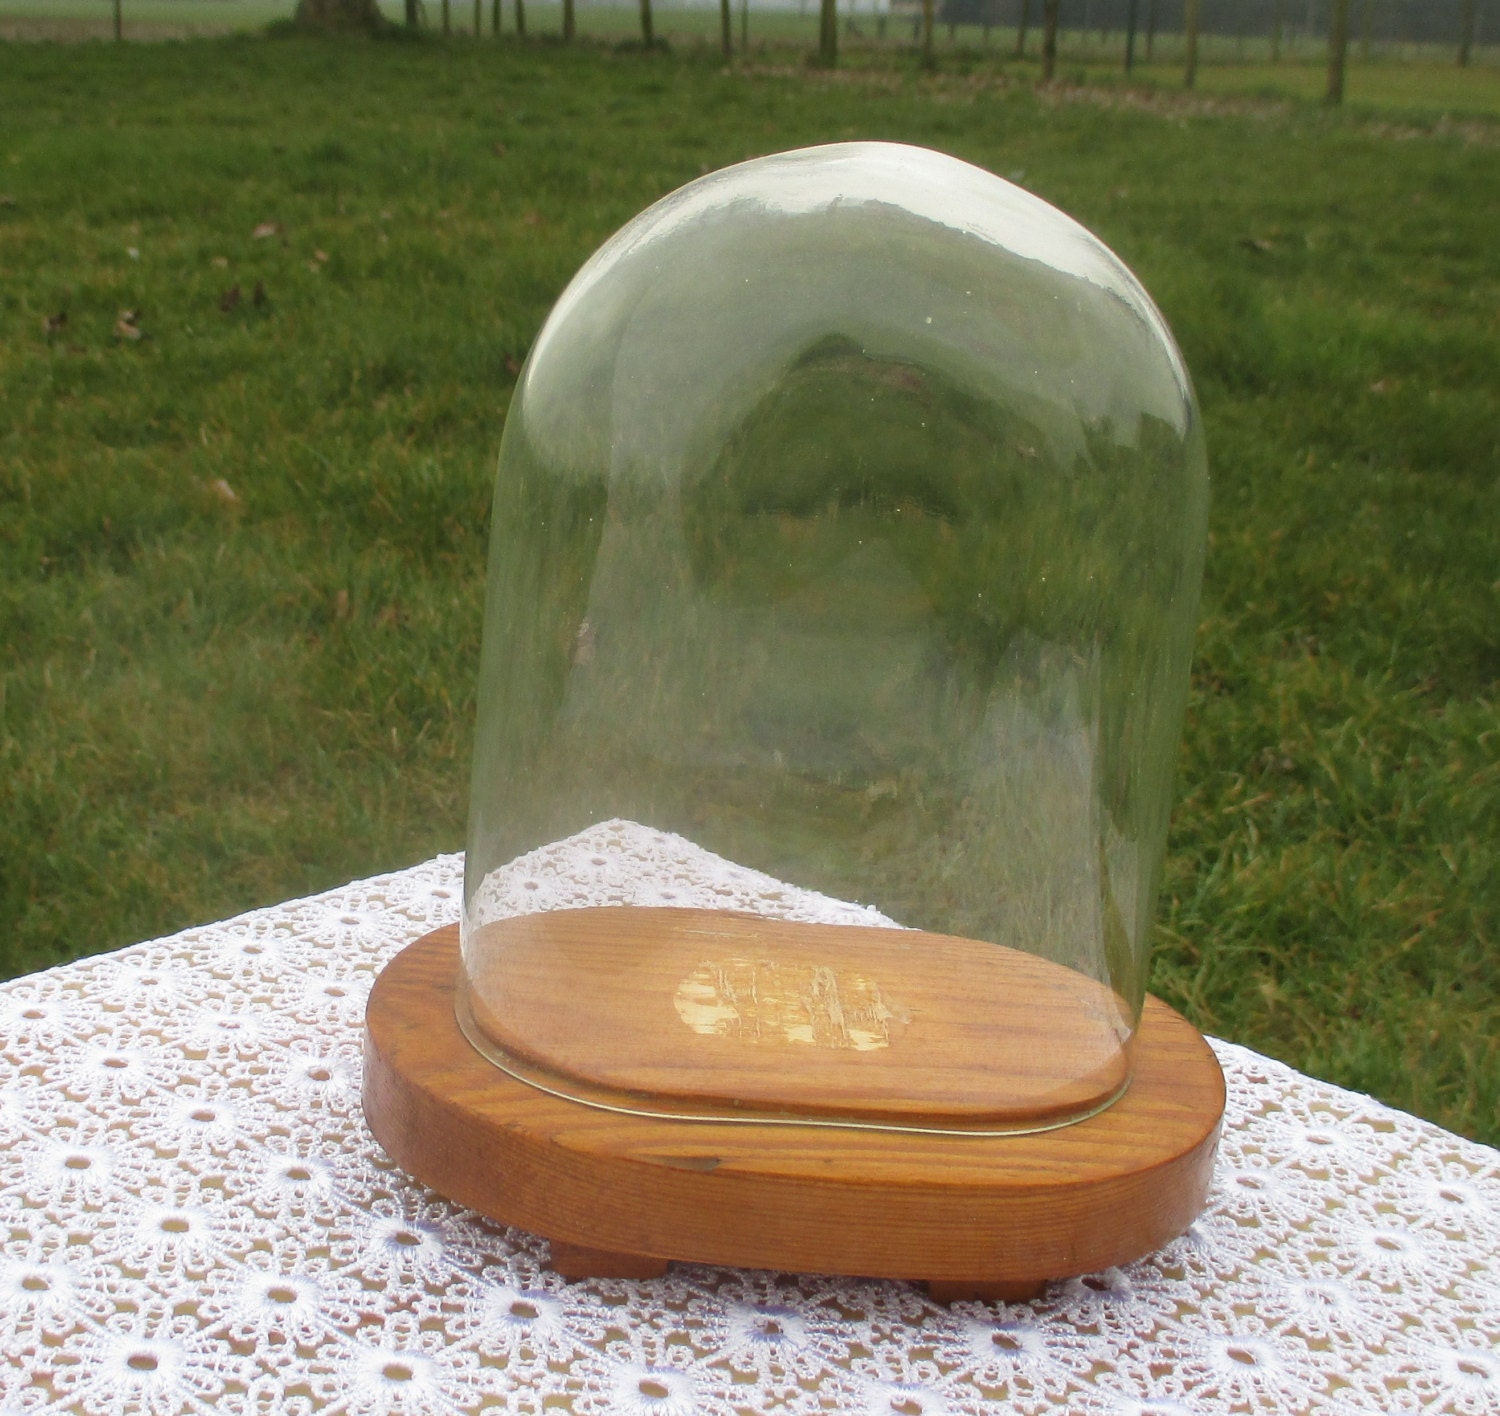 Small Vintage Oval Glass Globe Dome Bell Cloche Display Taxidermy Steampunk 6.3"